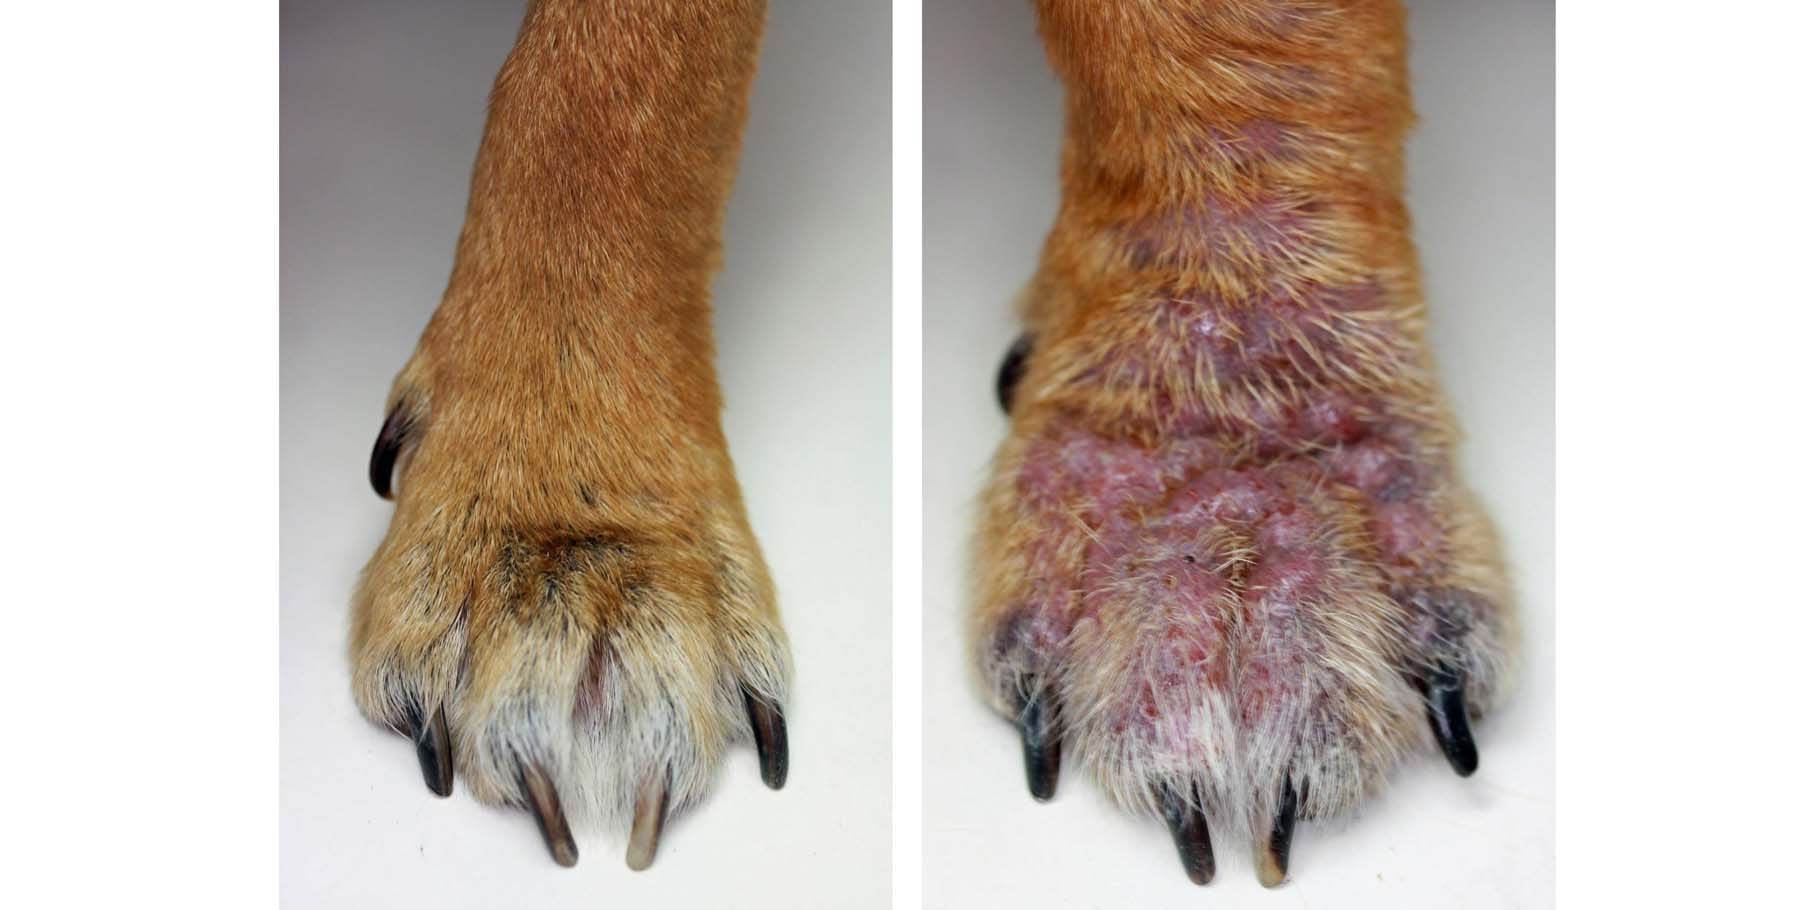 Pododemodicosis: before & after 8 weeks of Treatment